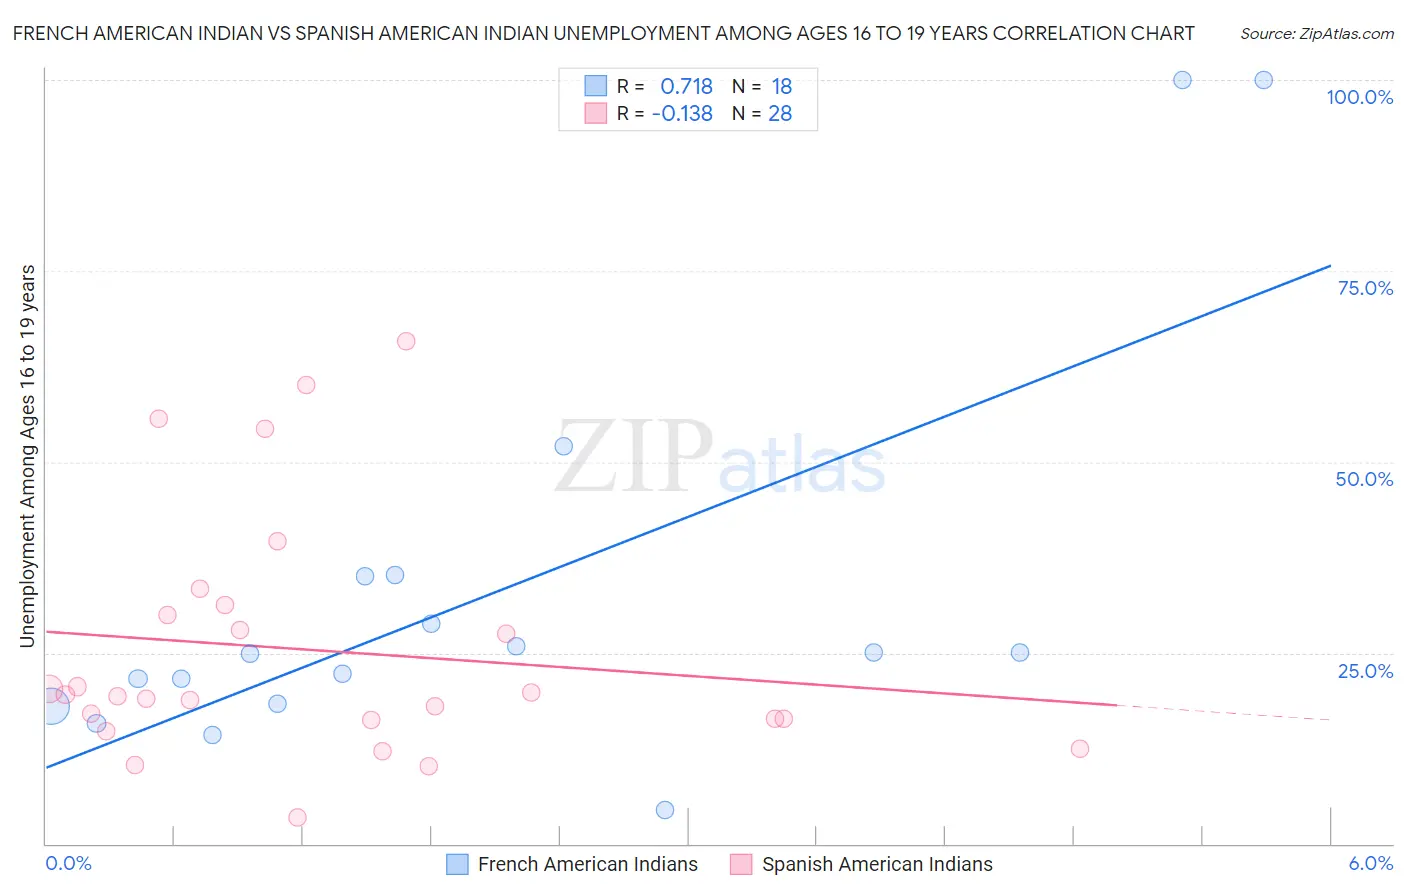 French American Indian vs Spanish American Indian Unemployment Among Ages 16 to 19 years